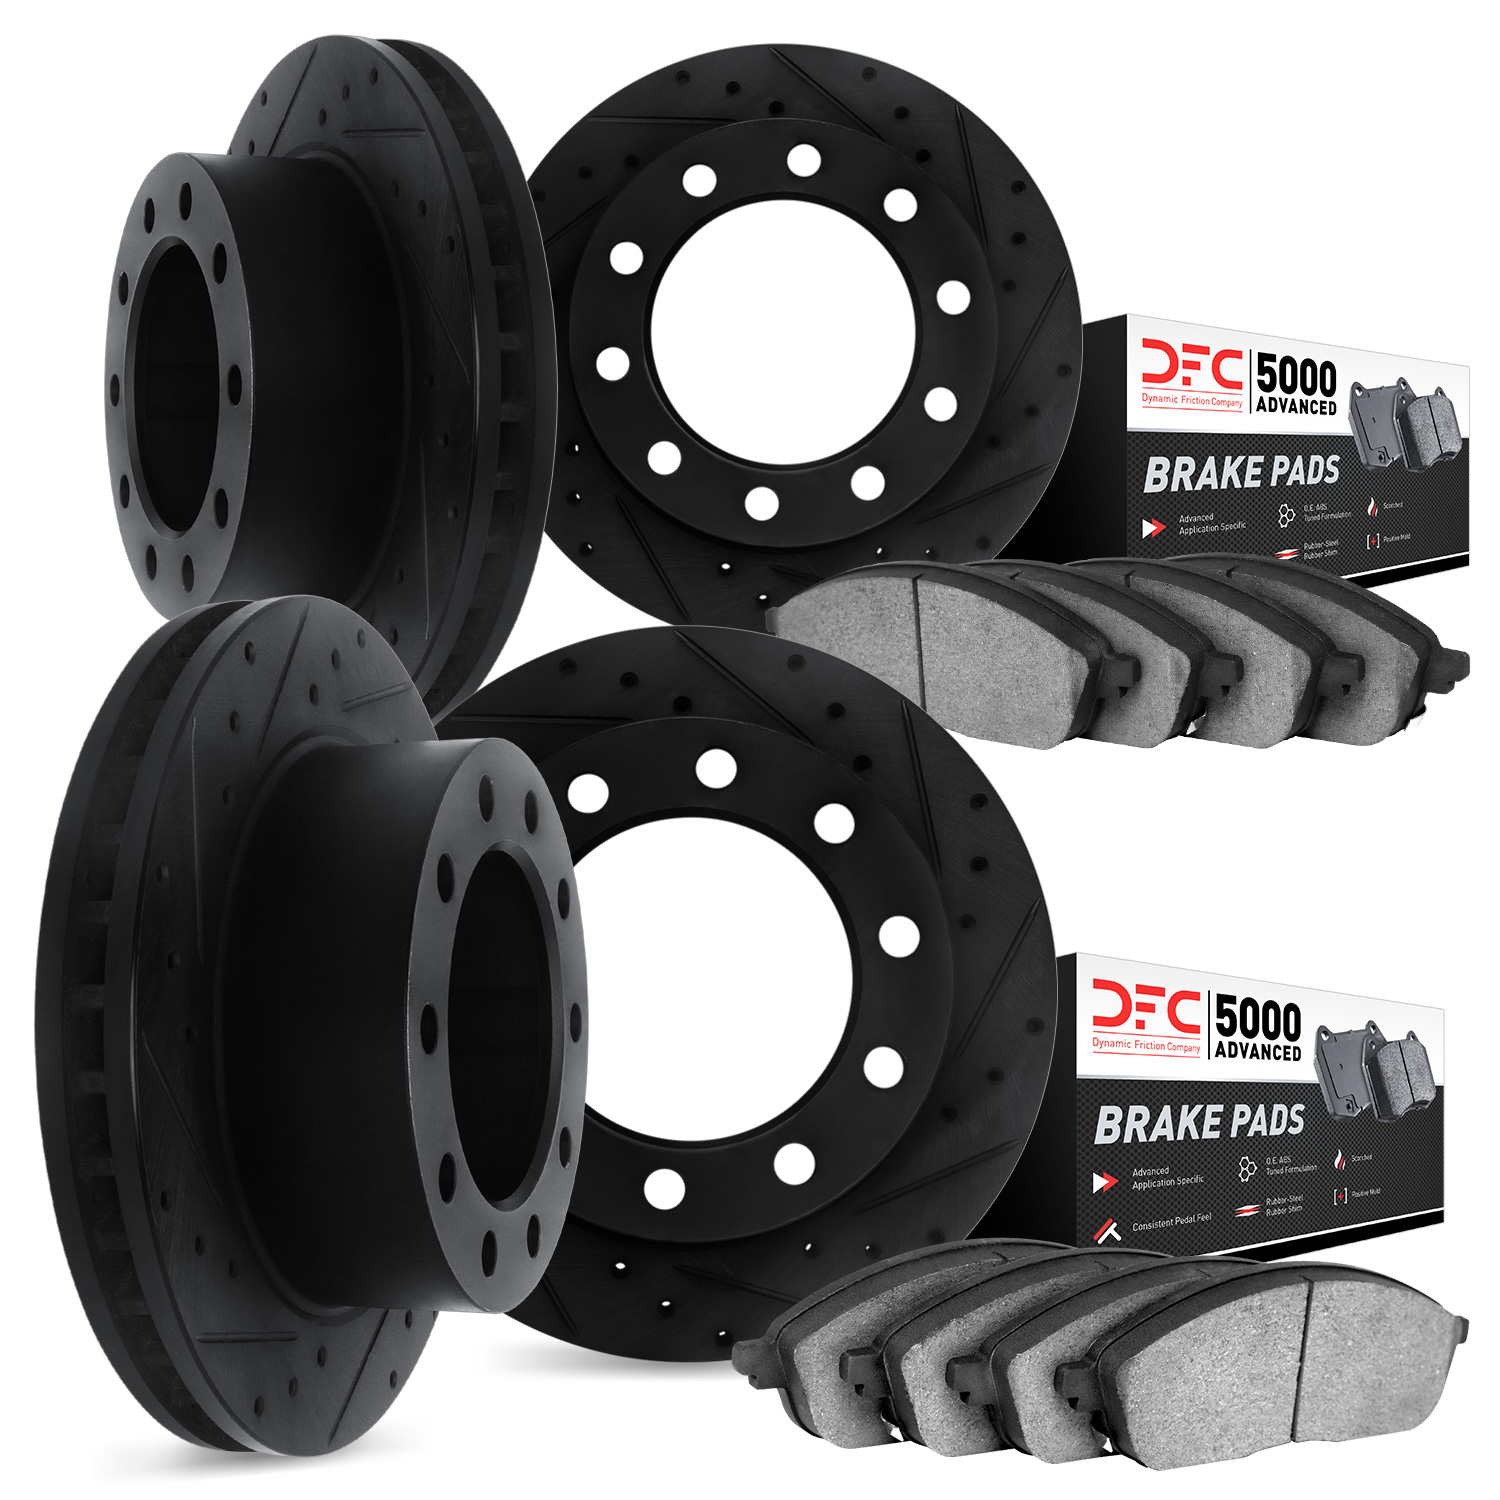 8504-54408 Drilled/Slotted Brake Rotors w/5000 Advanced Brake Pads Kit [Black], Fits Select Ford/Lincoln/Mercury/Mazda, Position